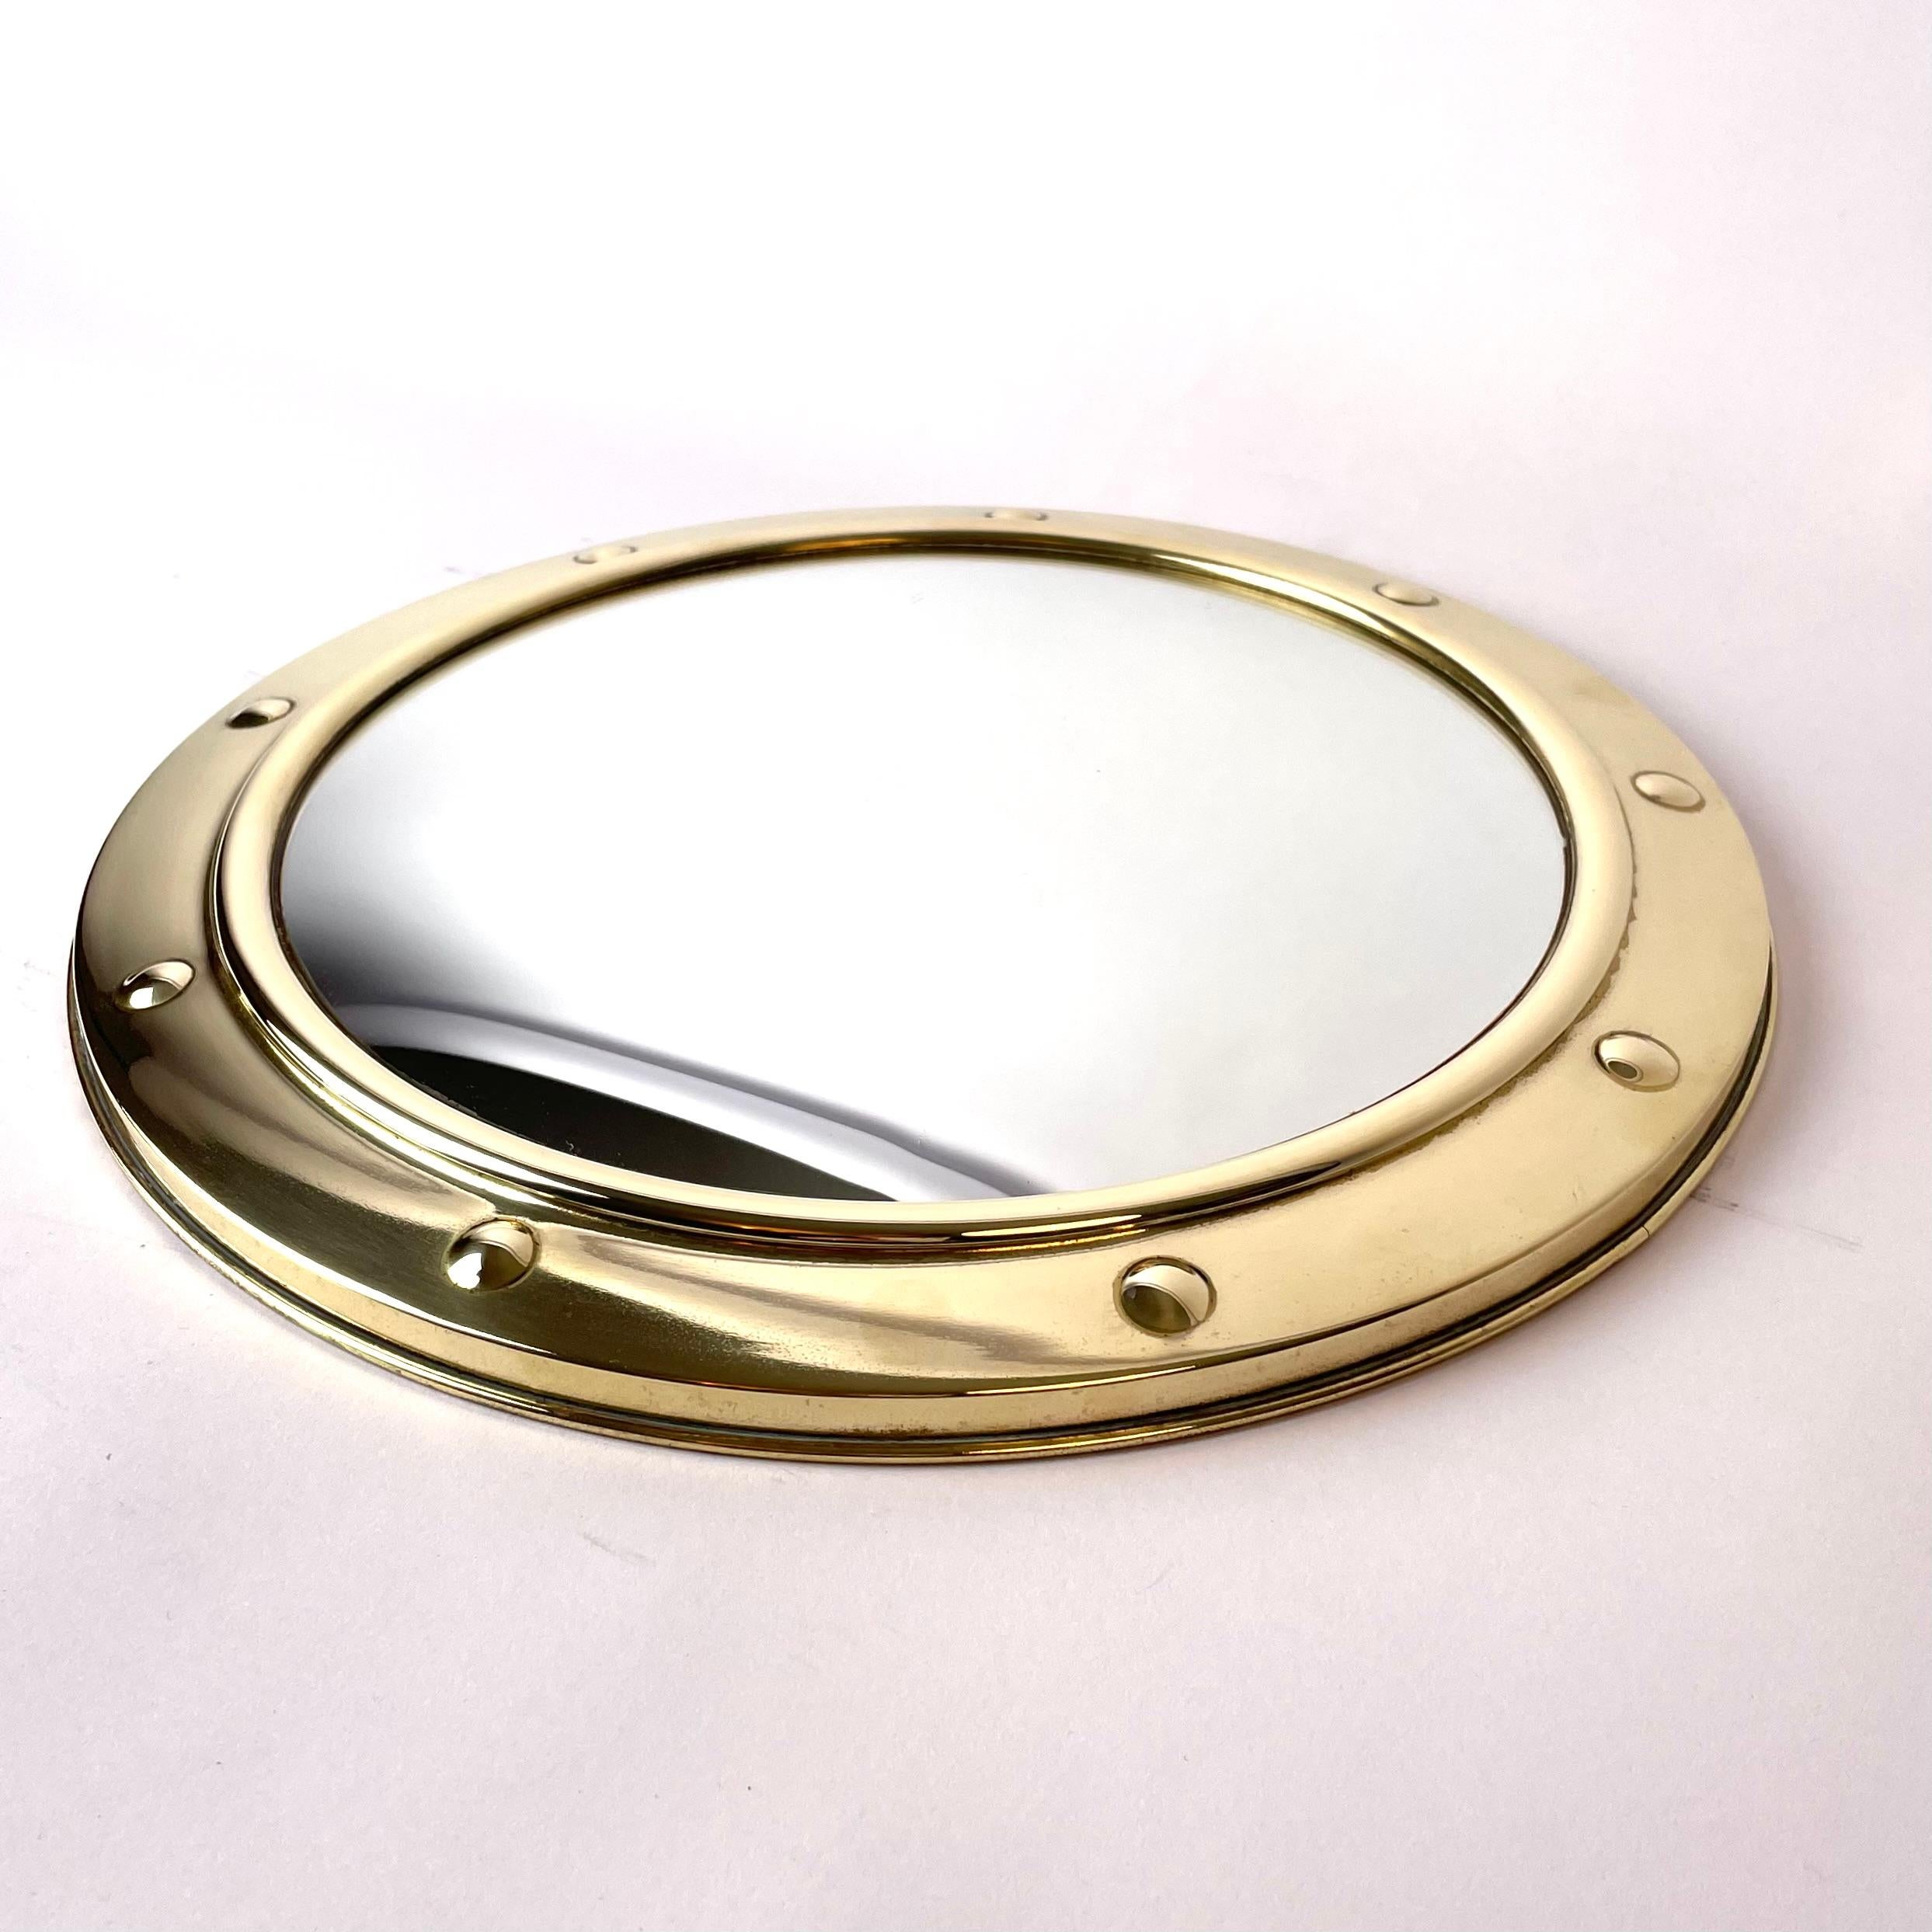 Mid-Century Modern Mid-20th Century Porthole Convex Wall Mirror in Brass For Sale